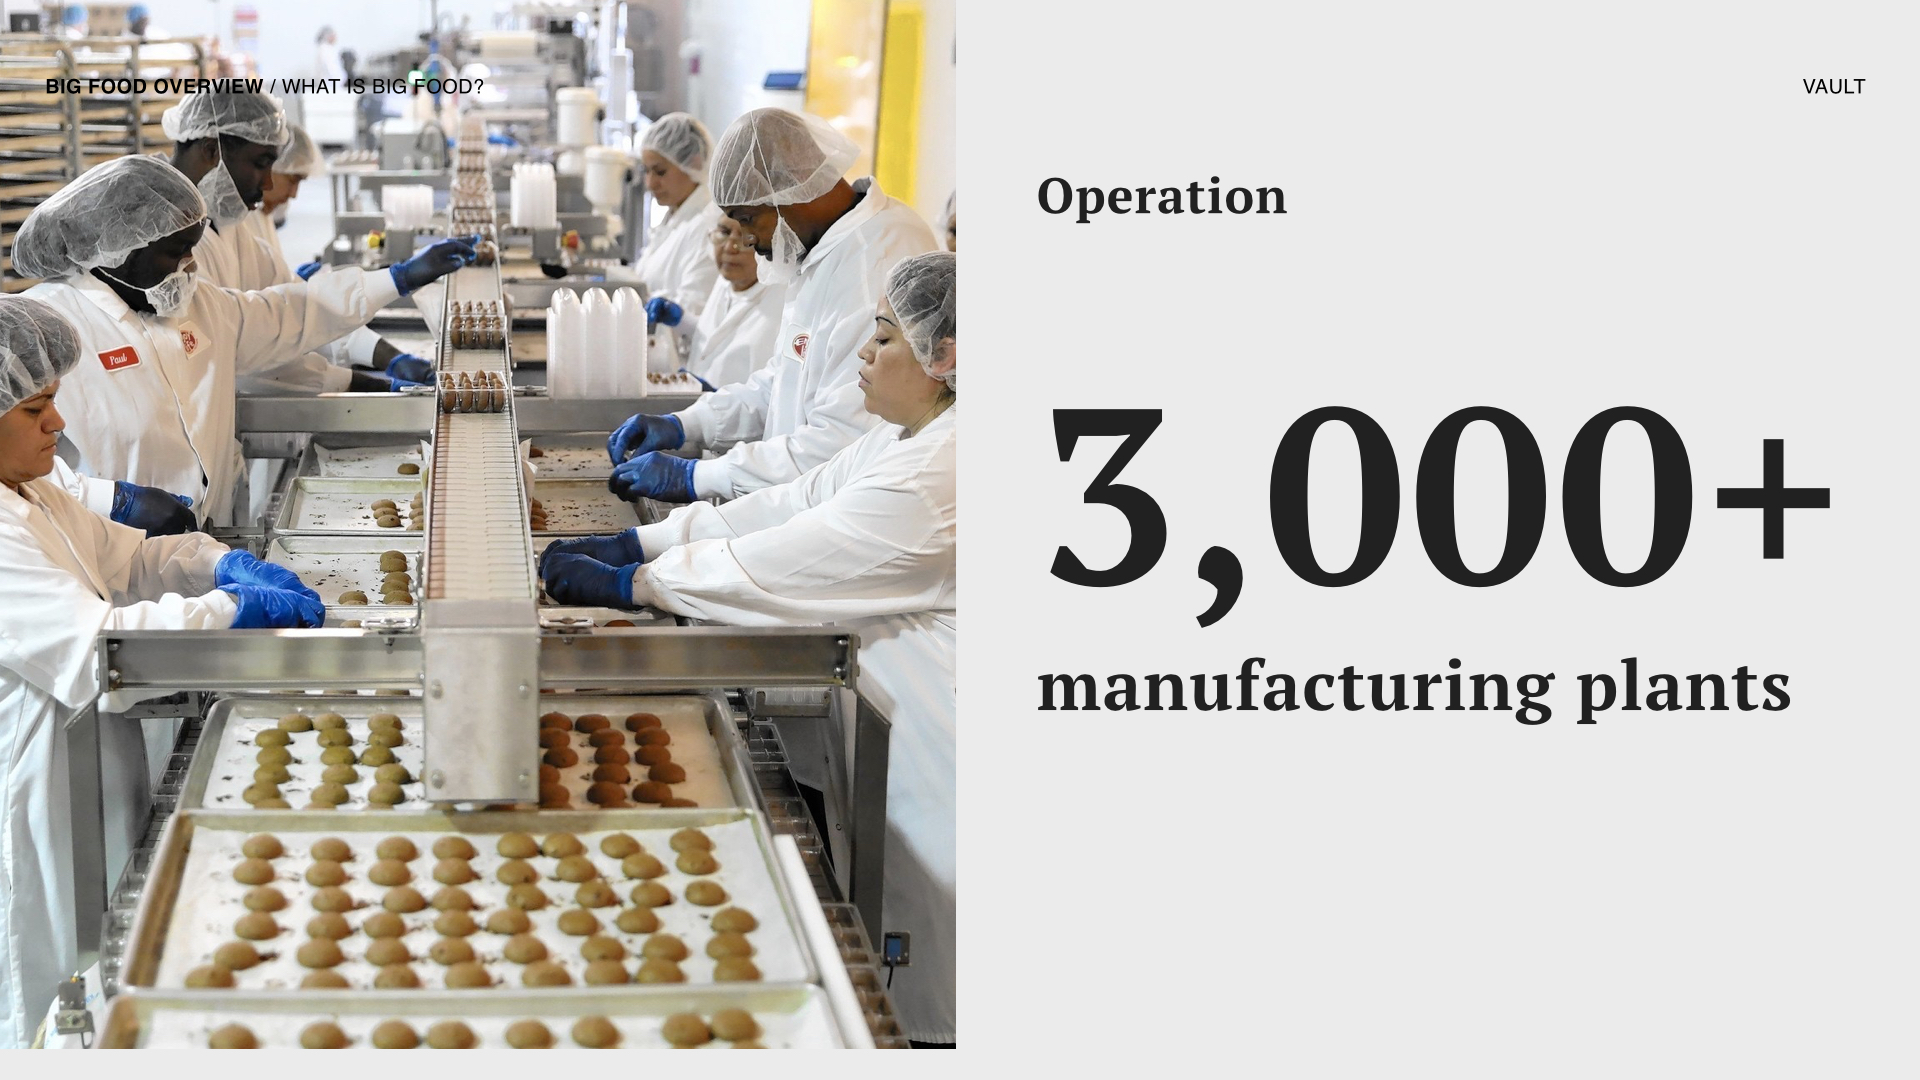  The 10 largest Big Food companies have global operation that accounts for over 3,000 manufacturing plants. 